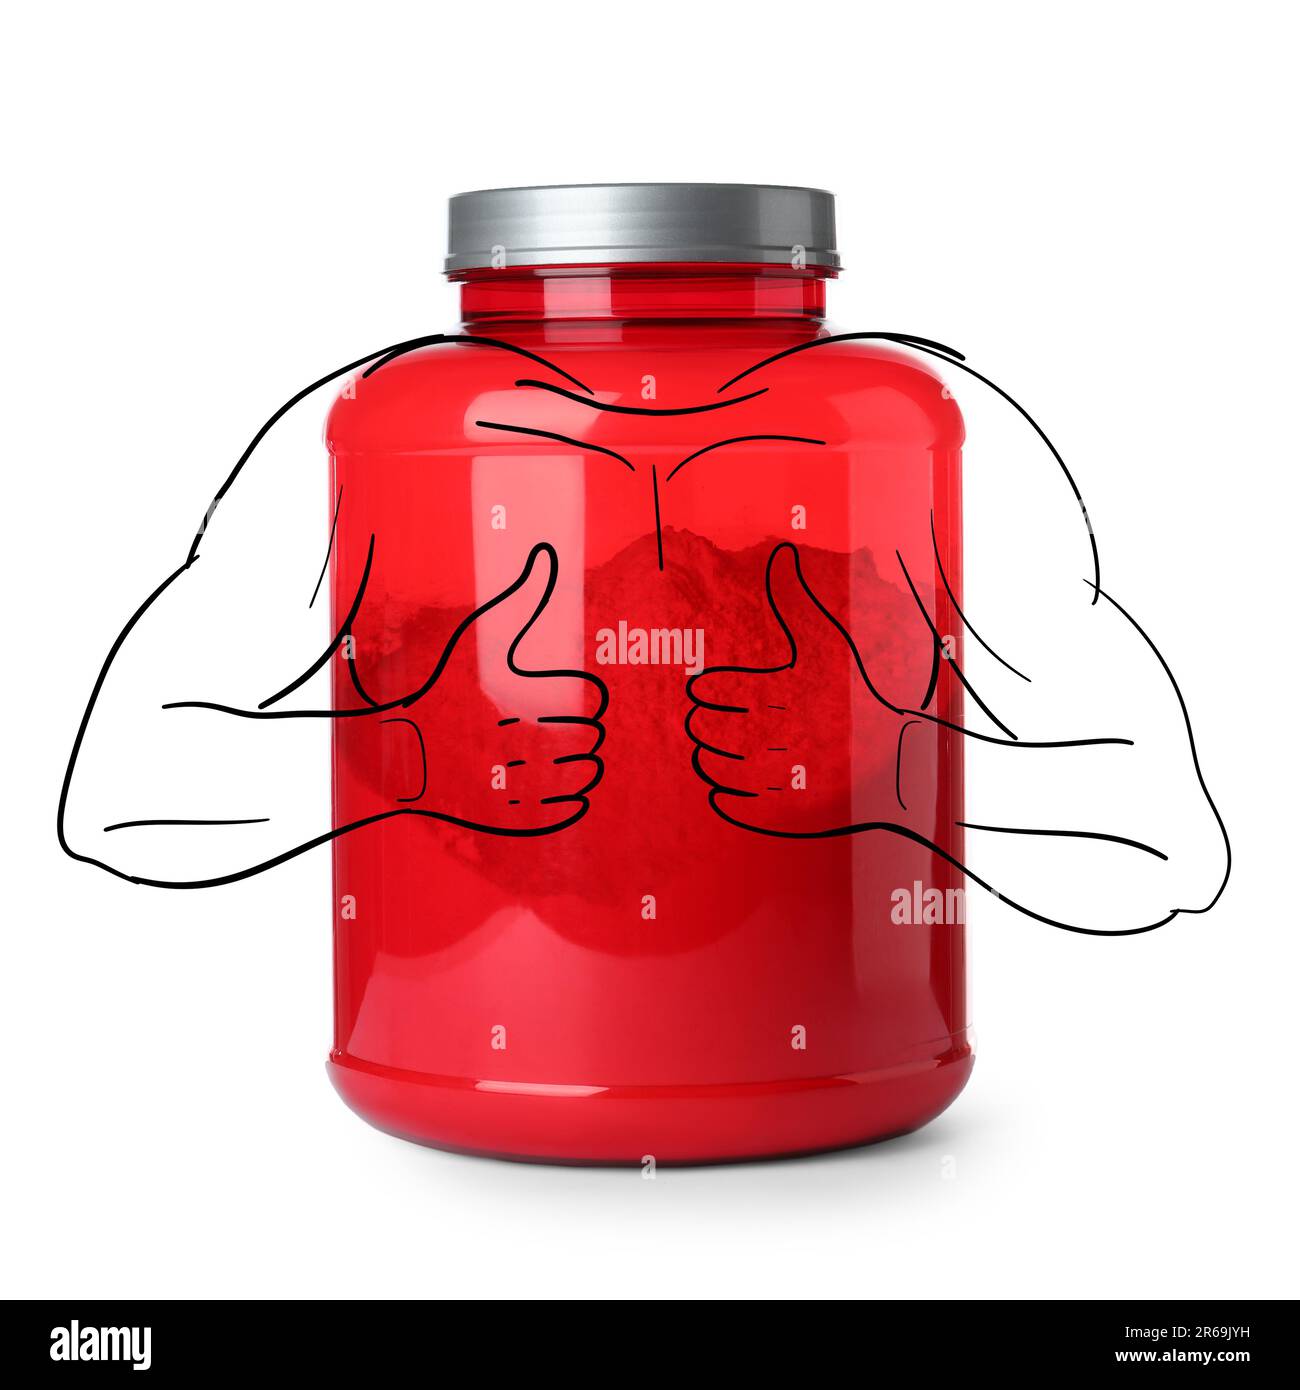 https://c8.alamy.com/comp/2R69JYH/red-jar-of-protein-powder-with-illustration-of-bodybuilder-showing-thumbs-up-gesture-on-white-background-2R69JYH.jpg